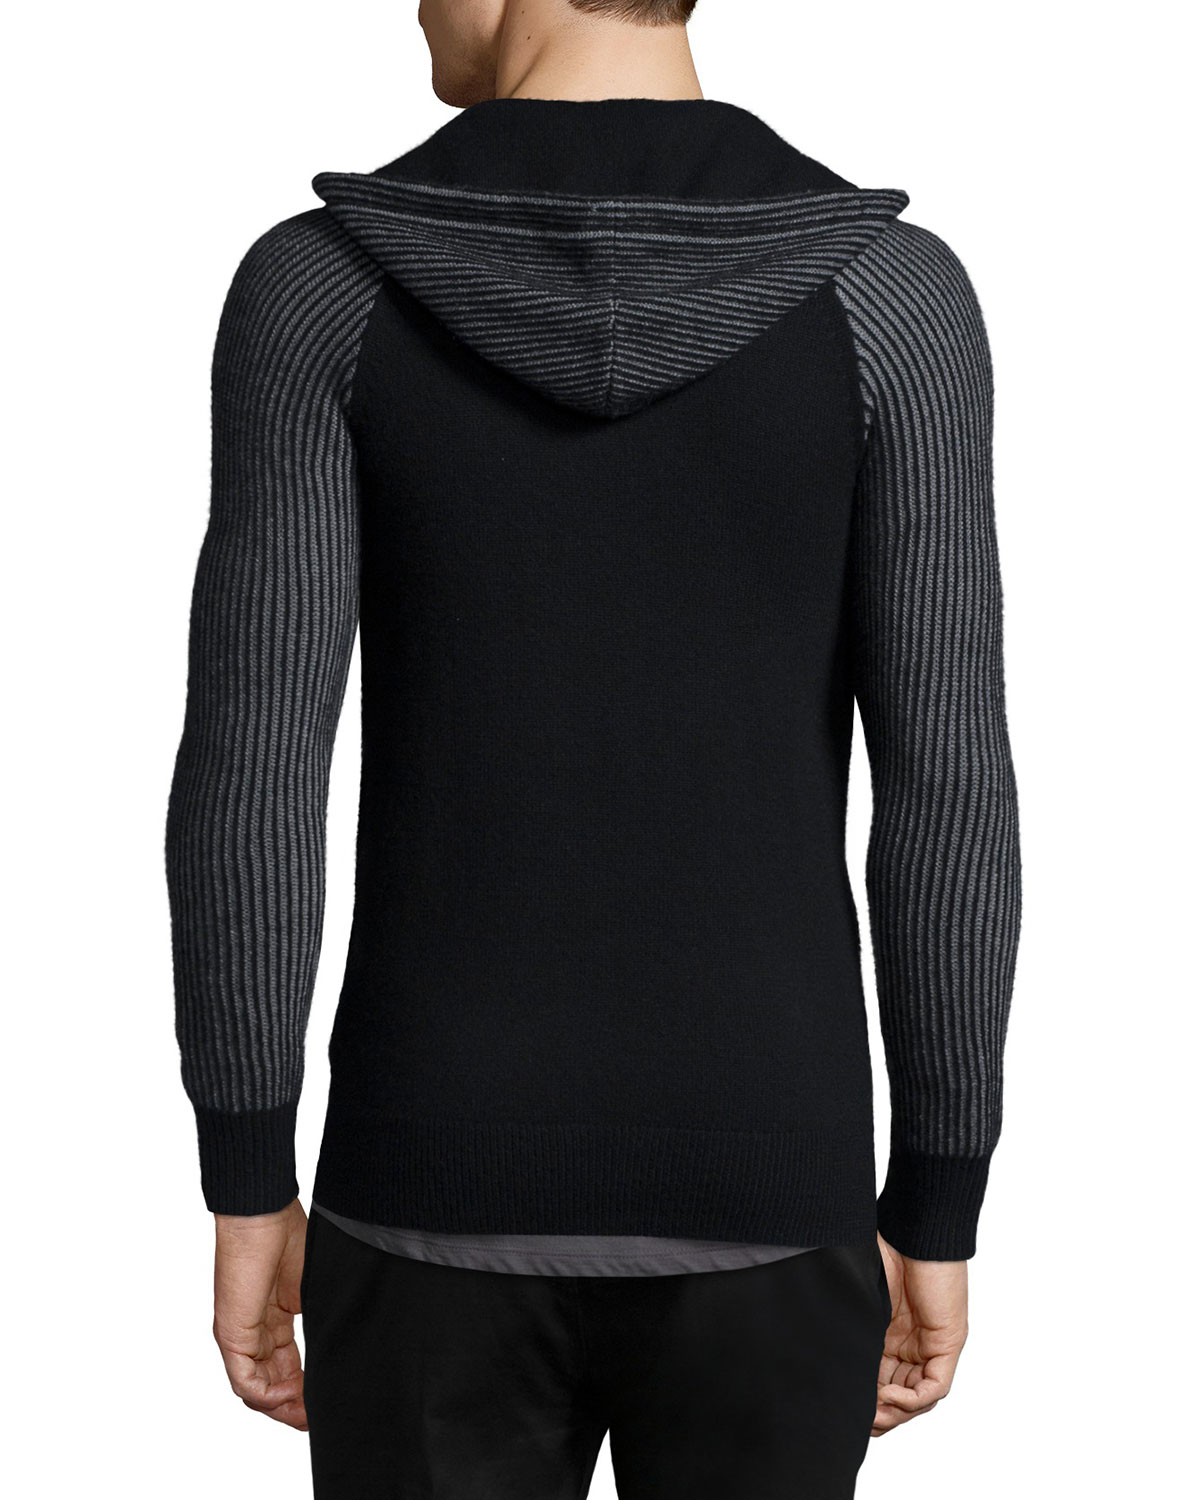 Lyst - Helmut Lang Zip-front Hooded Cashmere Sweater in Black for Men